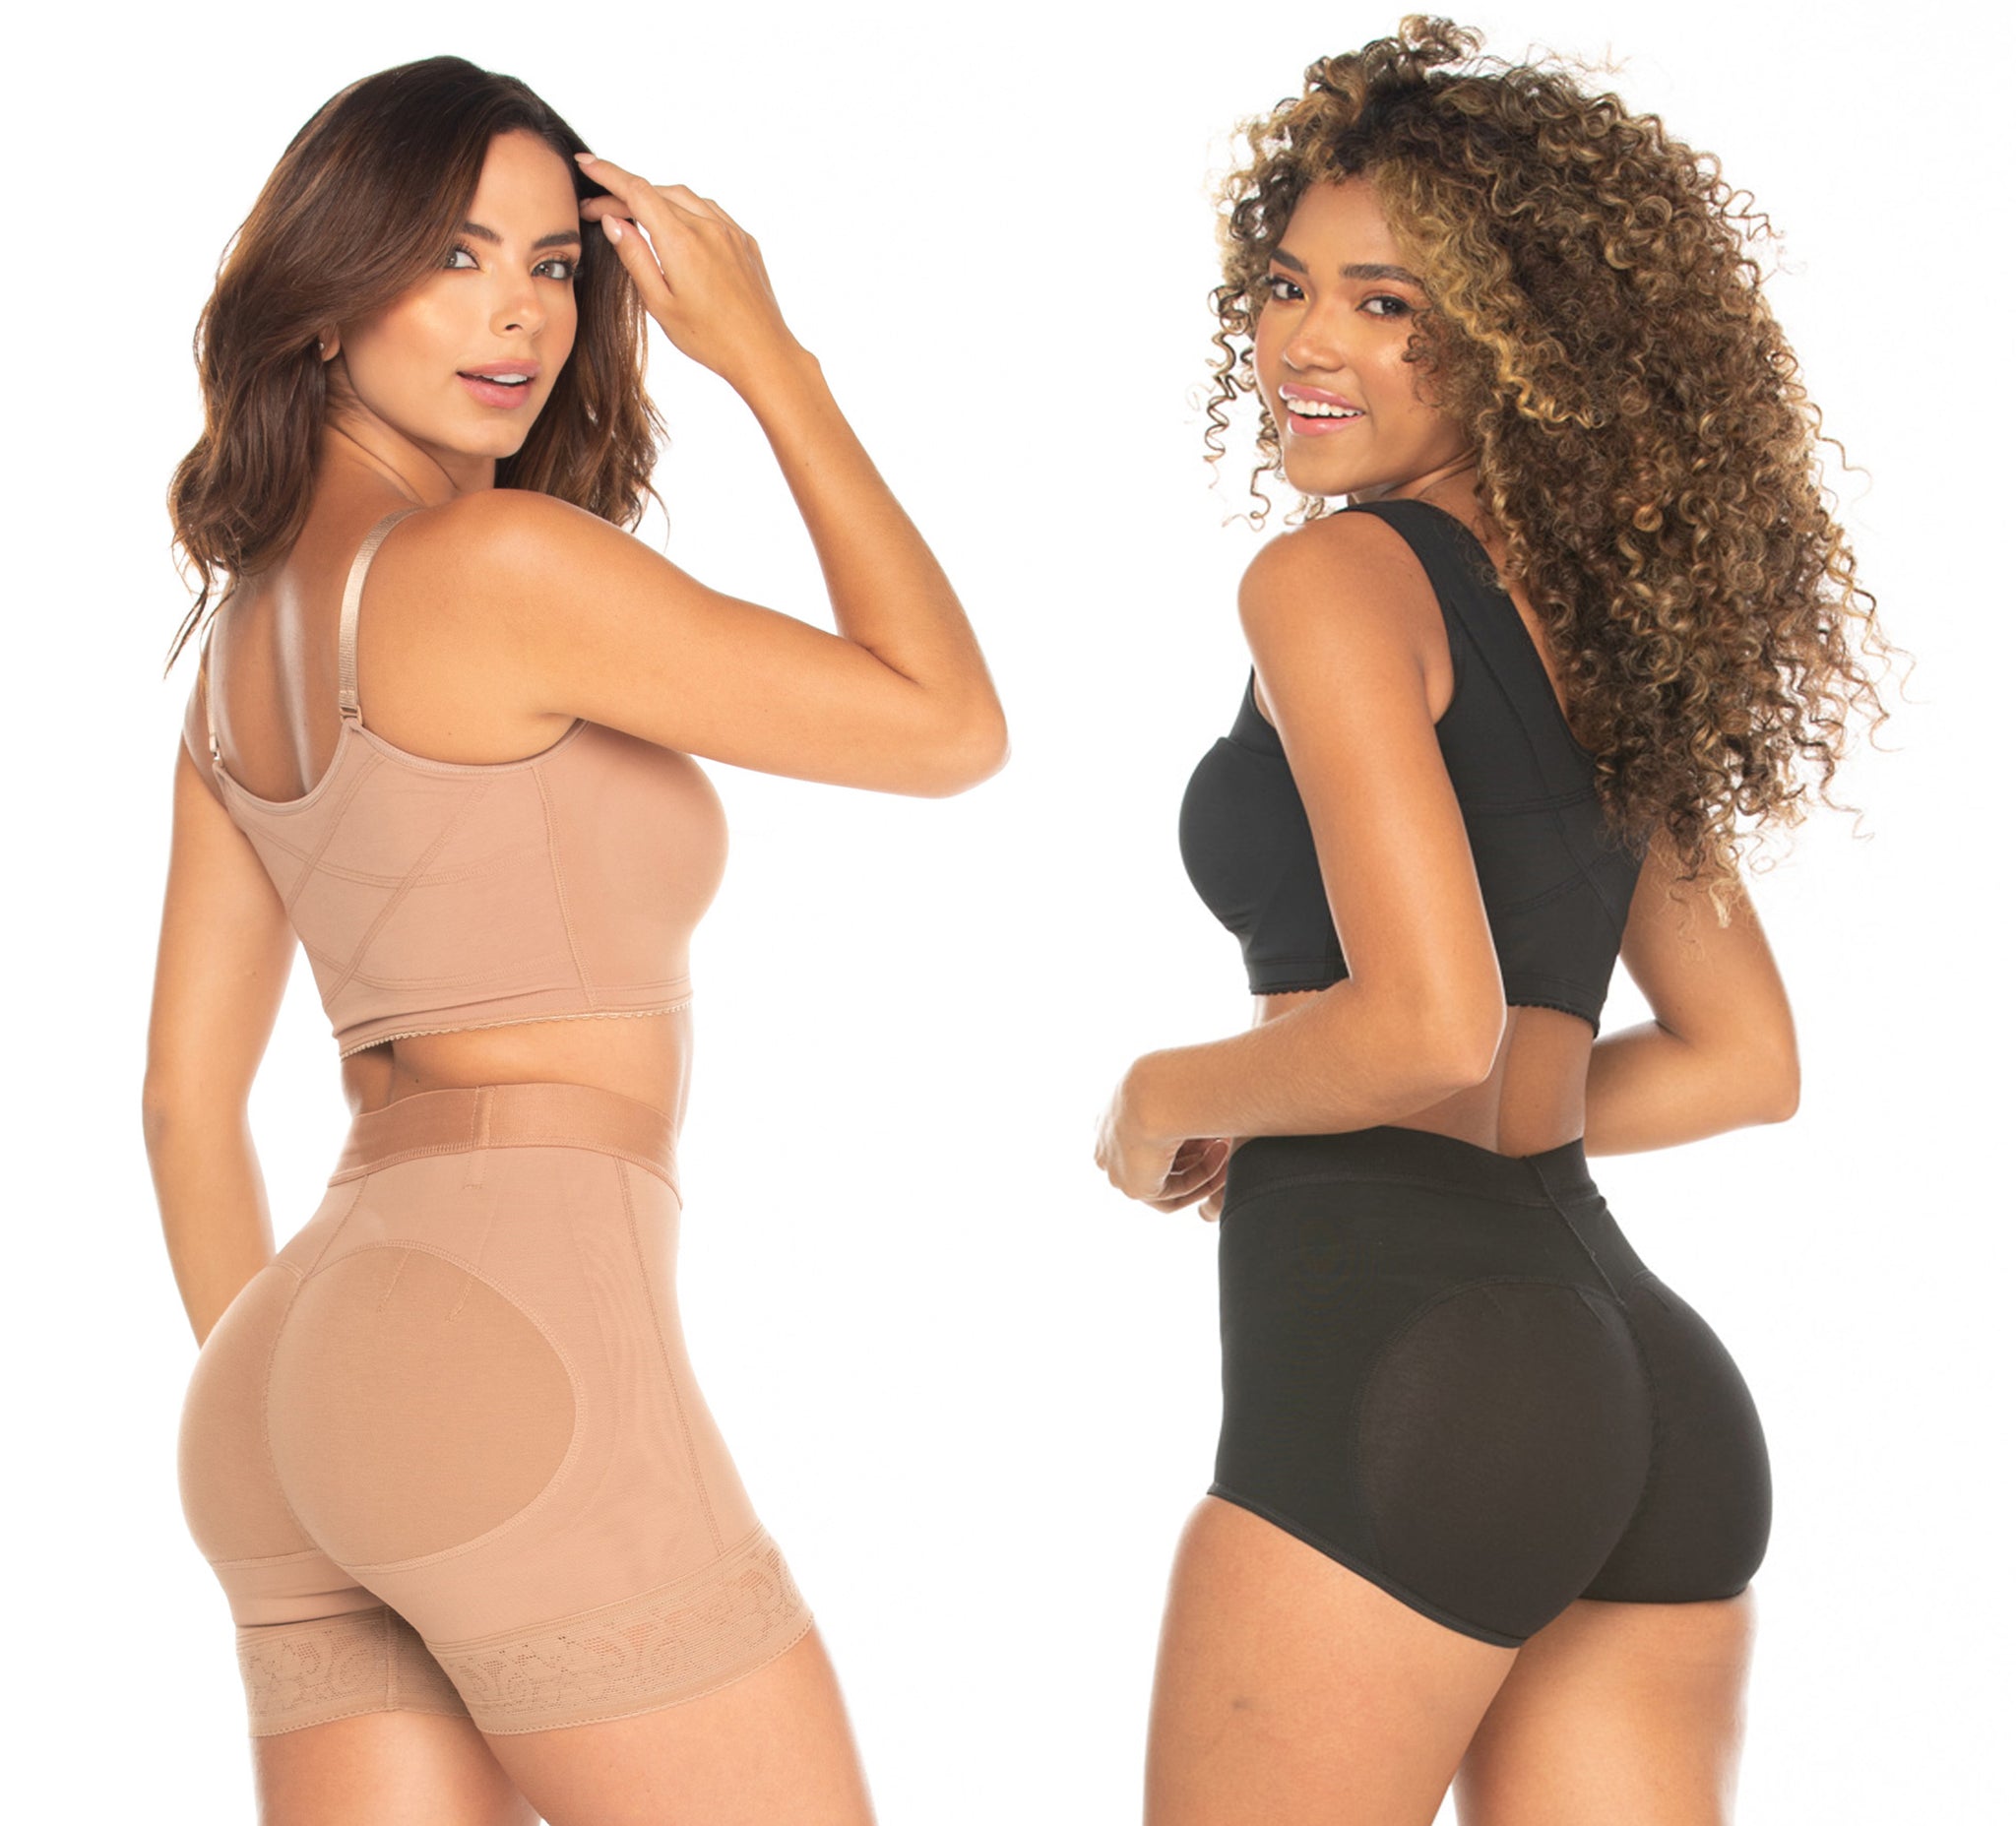 HOW TO WEAR BODY SHAPERS & SPANX, GET SLIM THIGHS, BUTT, AND STOMACH